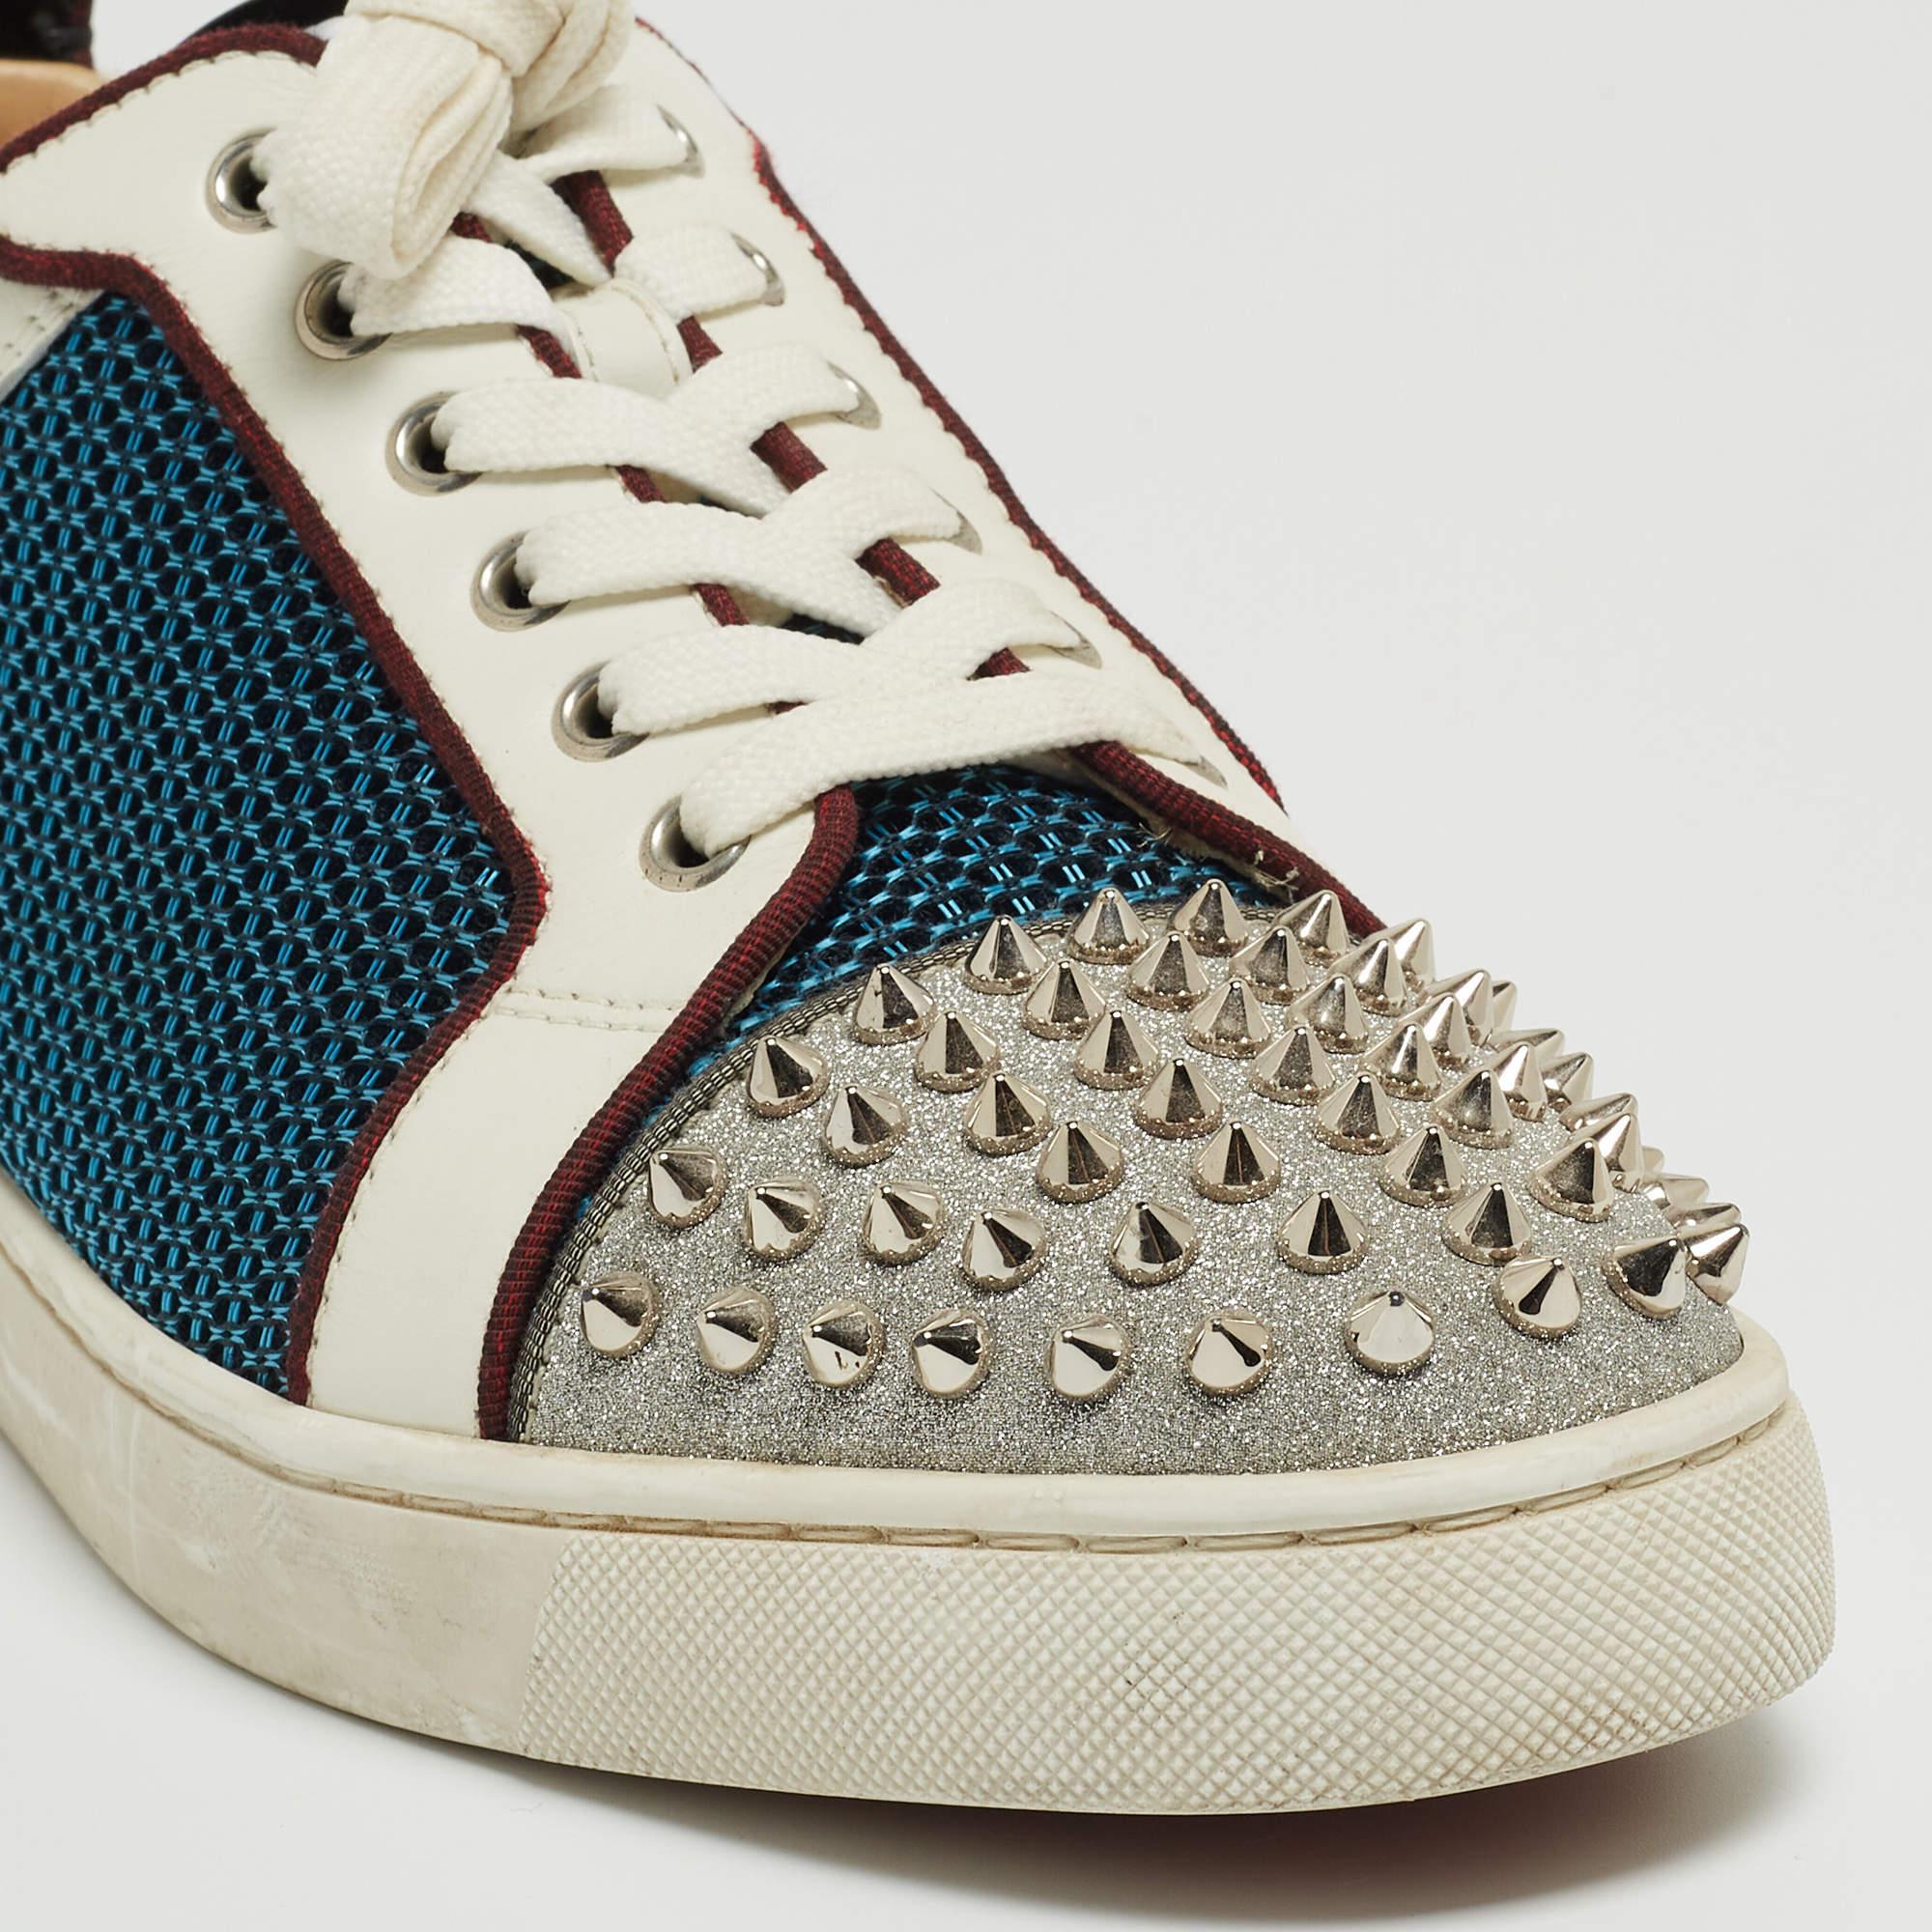 Men's Christian Louboutin Multicolor Mesh and Leather Louis Junior Spikes Sneakers Siz